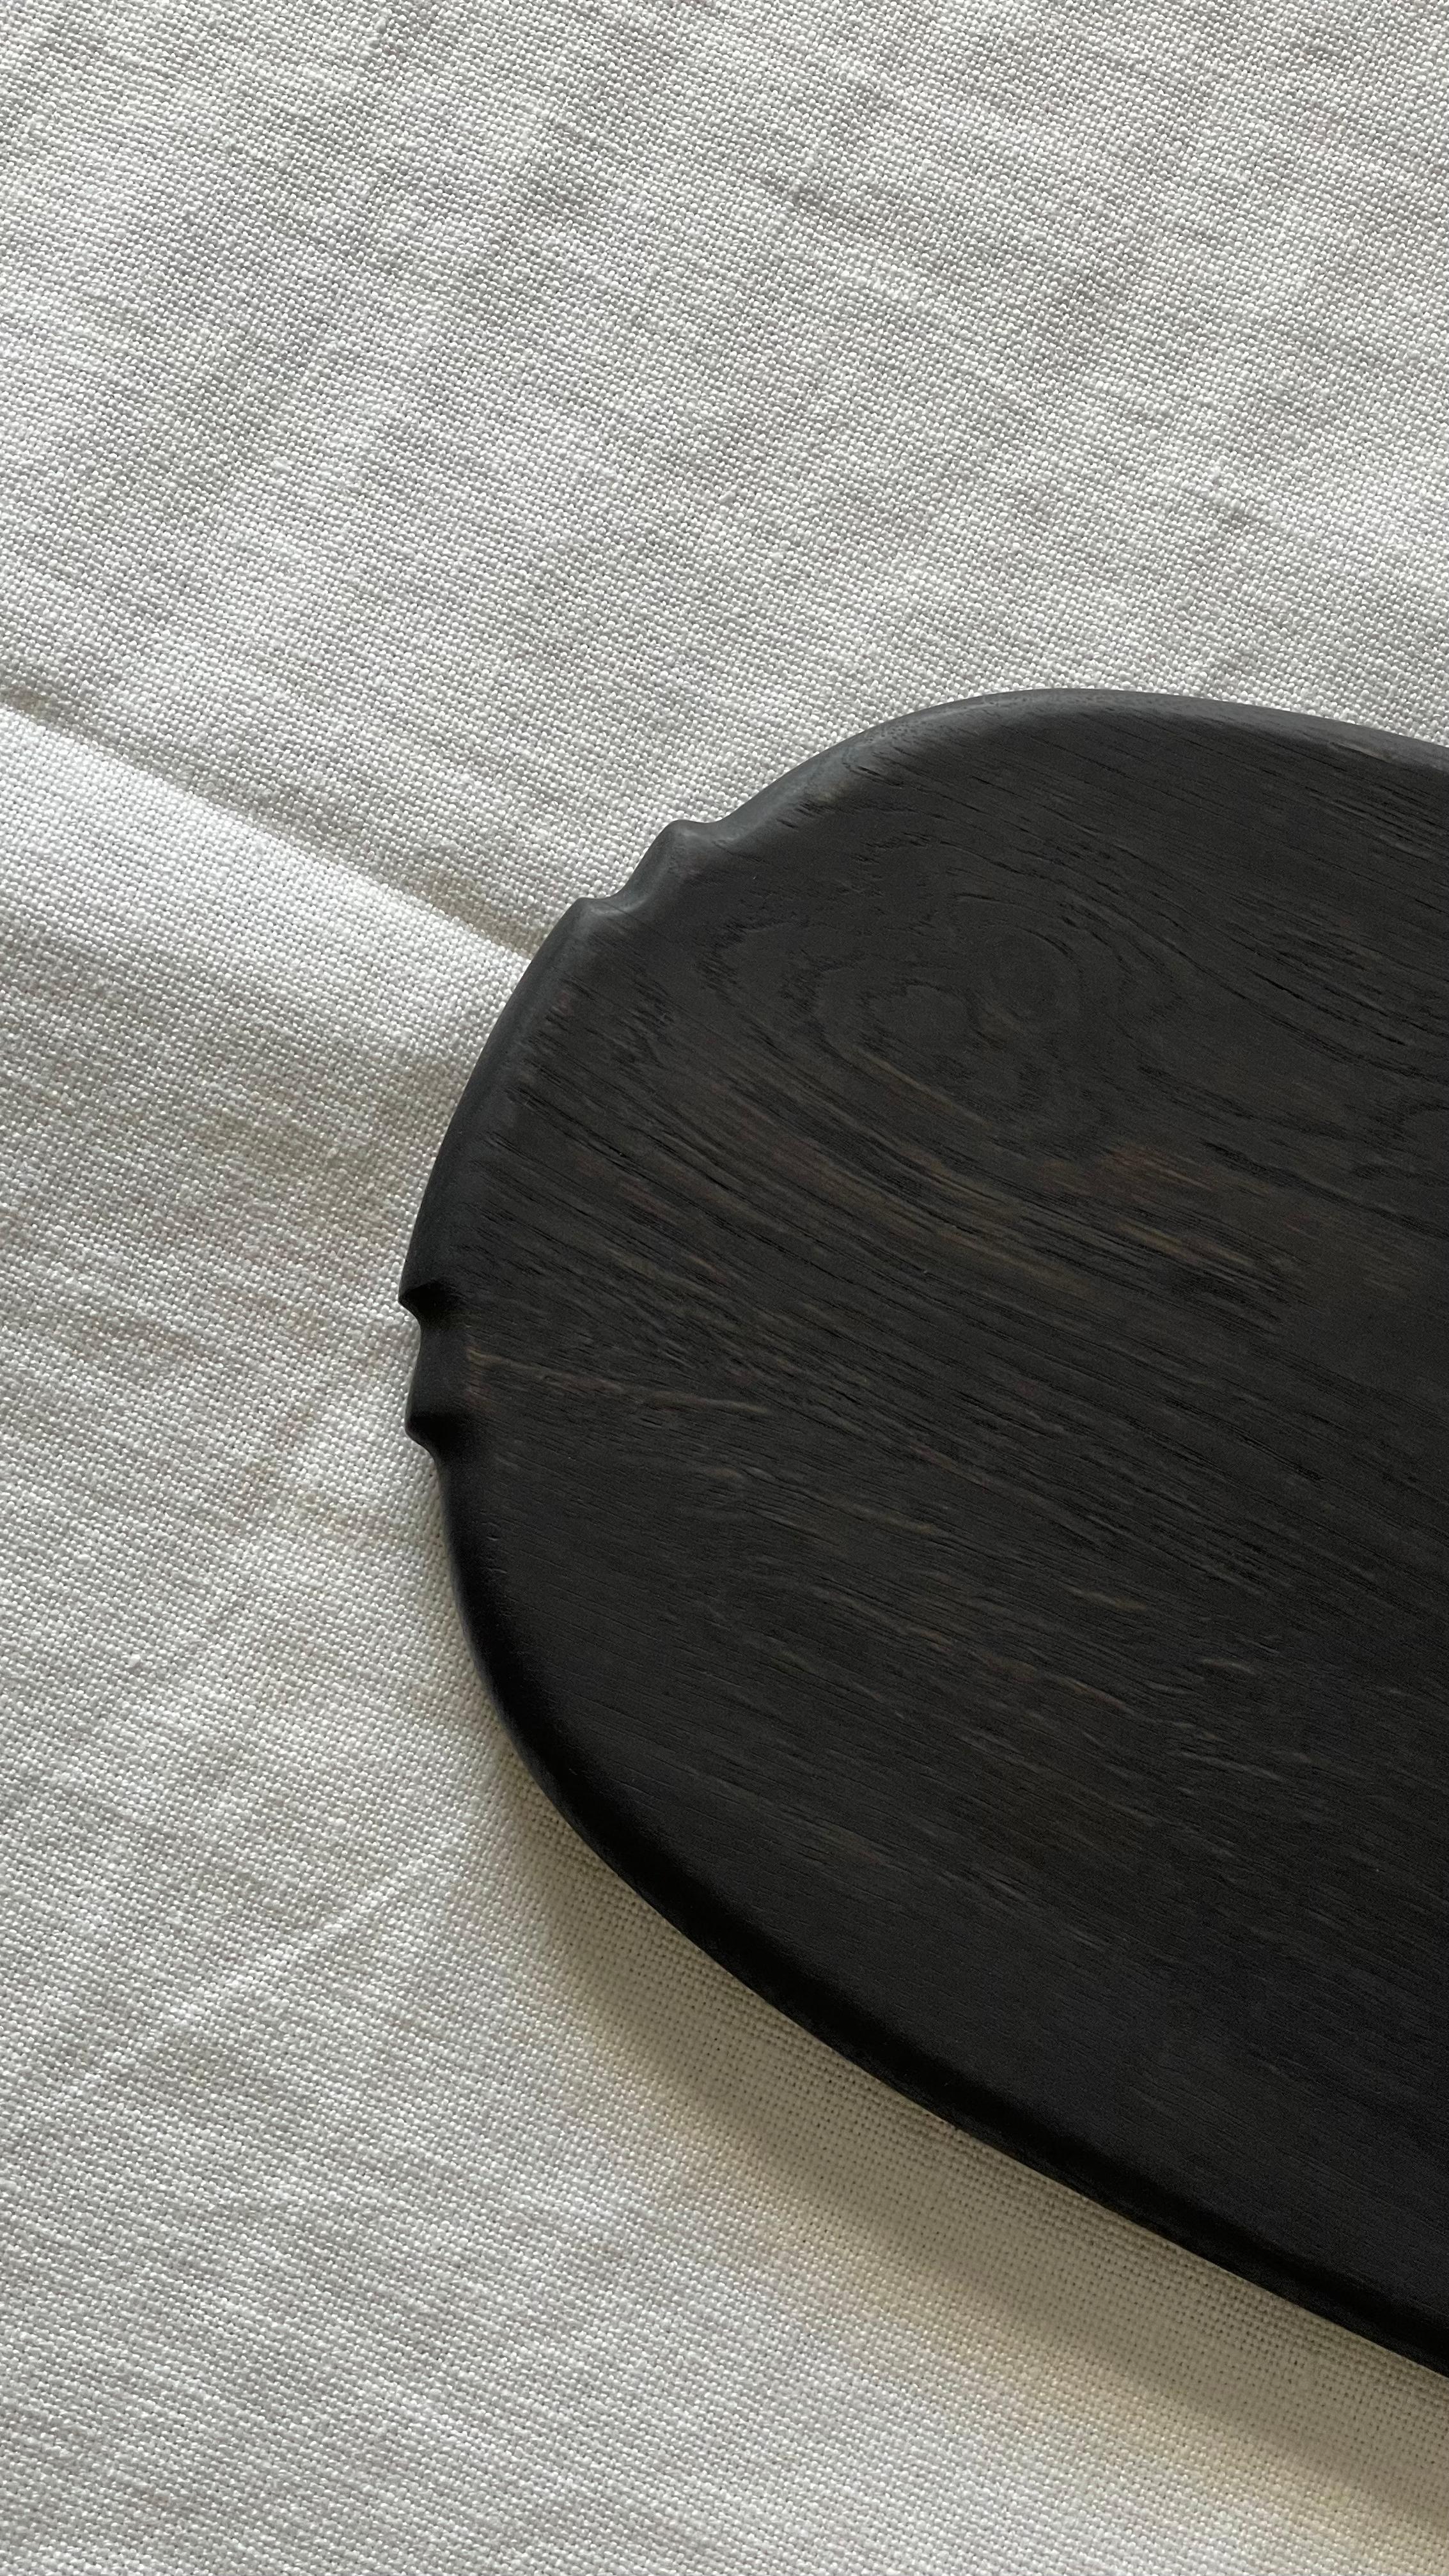 Our black oak choppers are made with ebonised heart oak. They are free from dyes and stains and food safe. Inspired by classical shapes our distinctive serving boards and chopping boards can be used functionally or decoratively bringing a striking